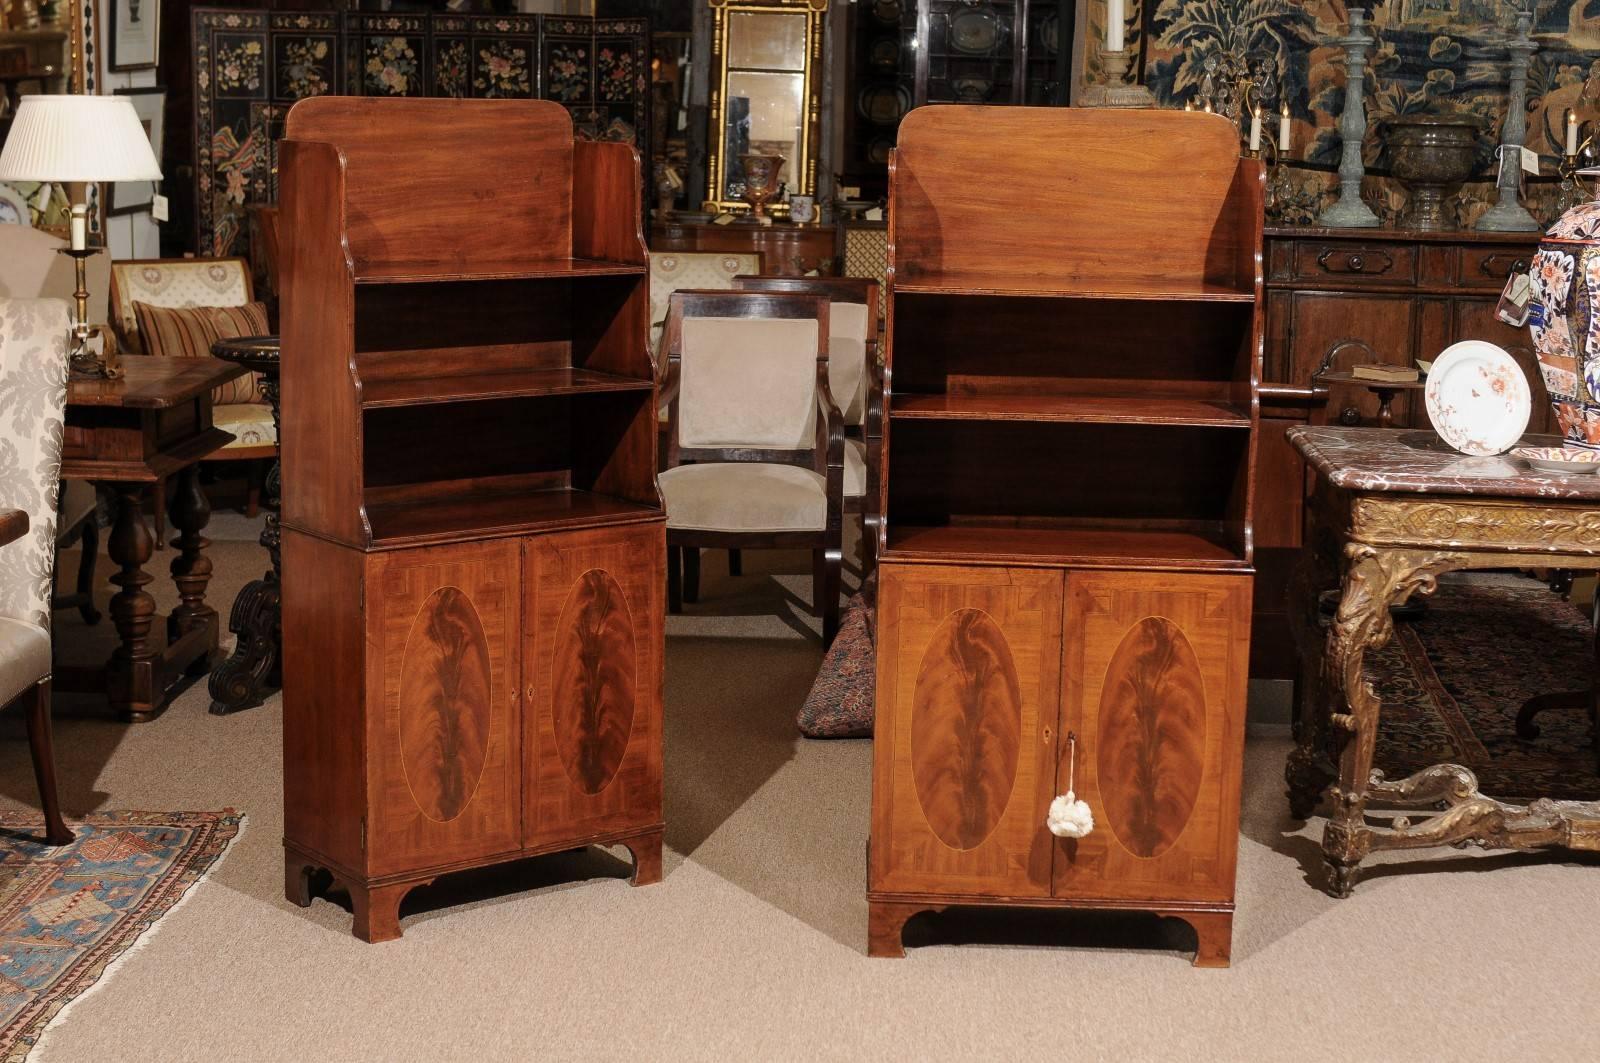 A pair of 19th century English Regency style mahogany bookcases featuring inlaid lower cabinet doors ending on bracket feet.